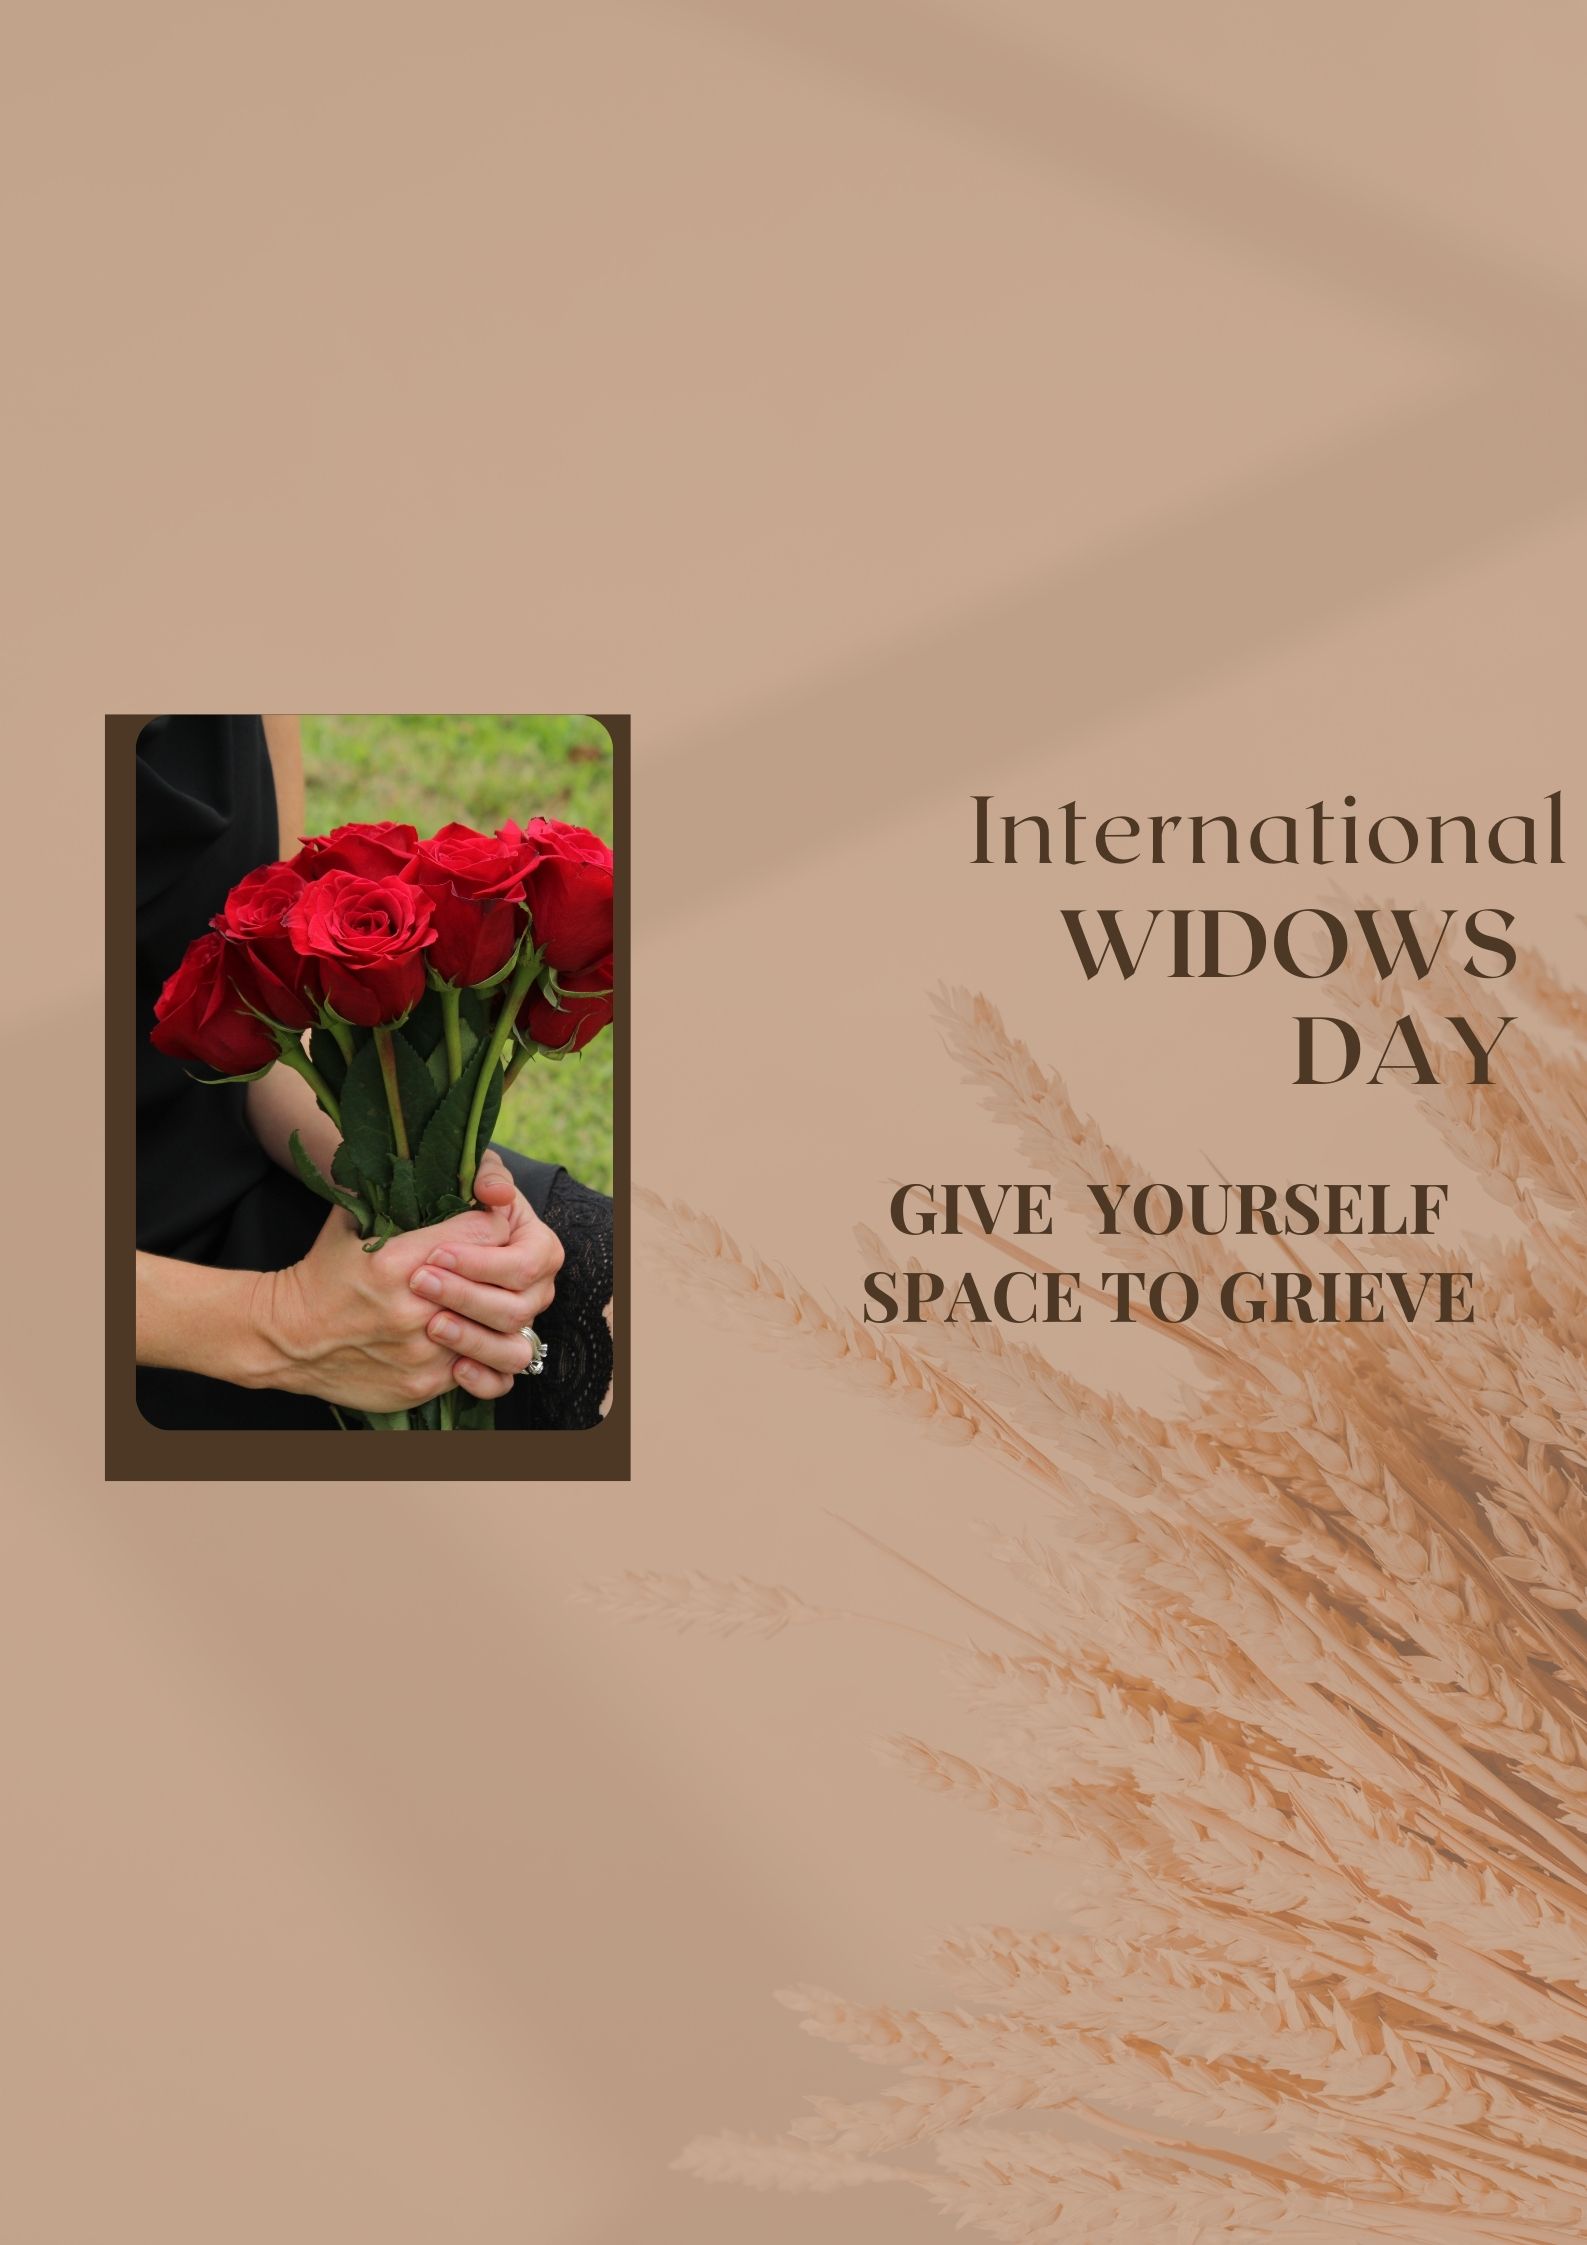 International Widows Day – how to deal with grief